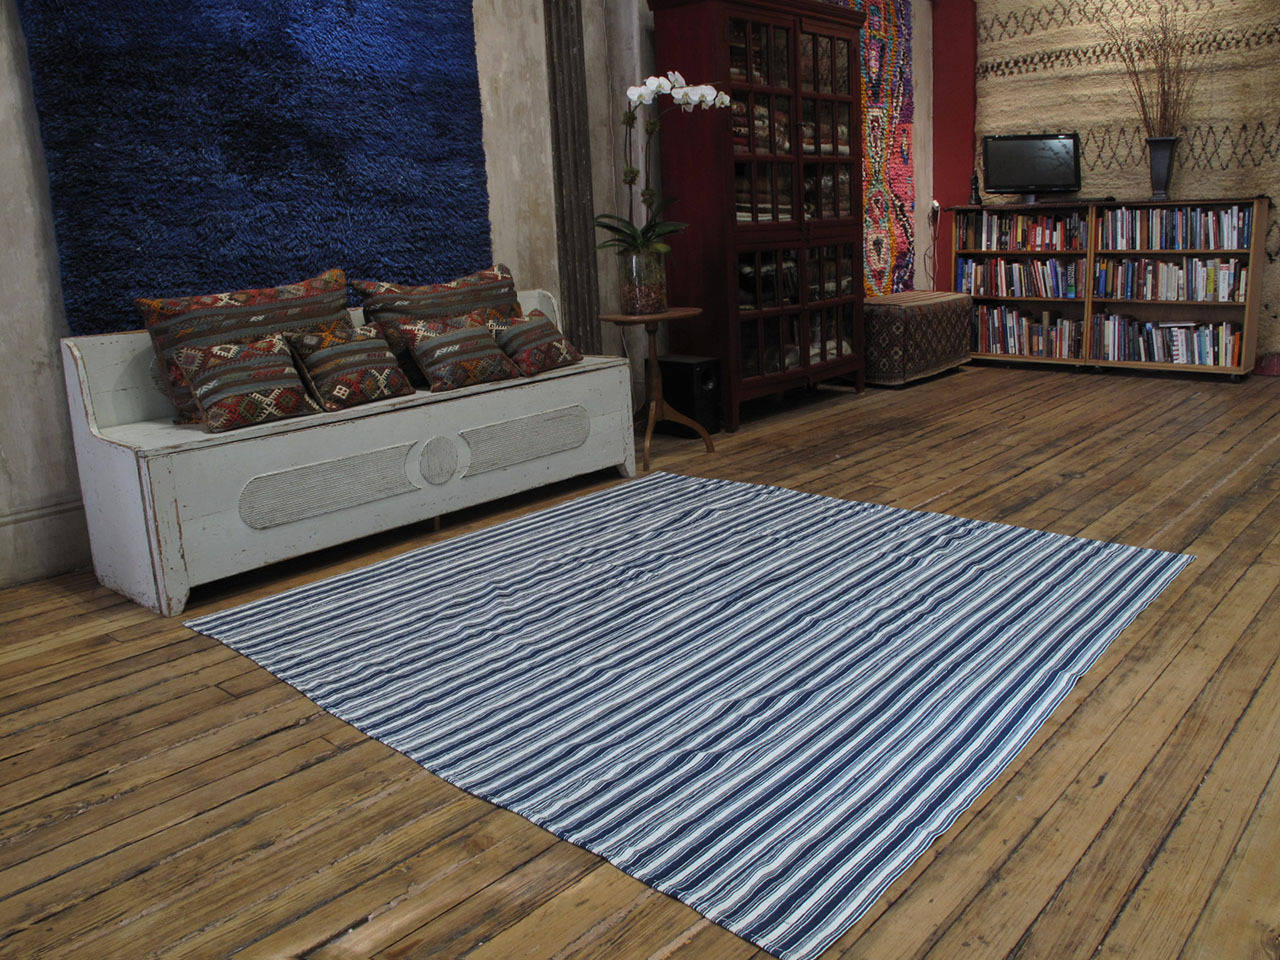 An old tribal cover by the Shahsavan of Azerbaijan, woven with hand-spun cotton in alternating stripes of indigo and white. Wonderful patina and blanket, like handle. Sturdy enough to be used as a floor cover in low traffic. Would be ideal as a bed